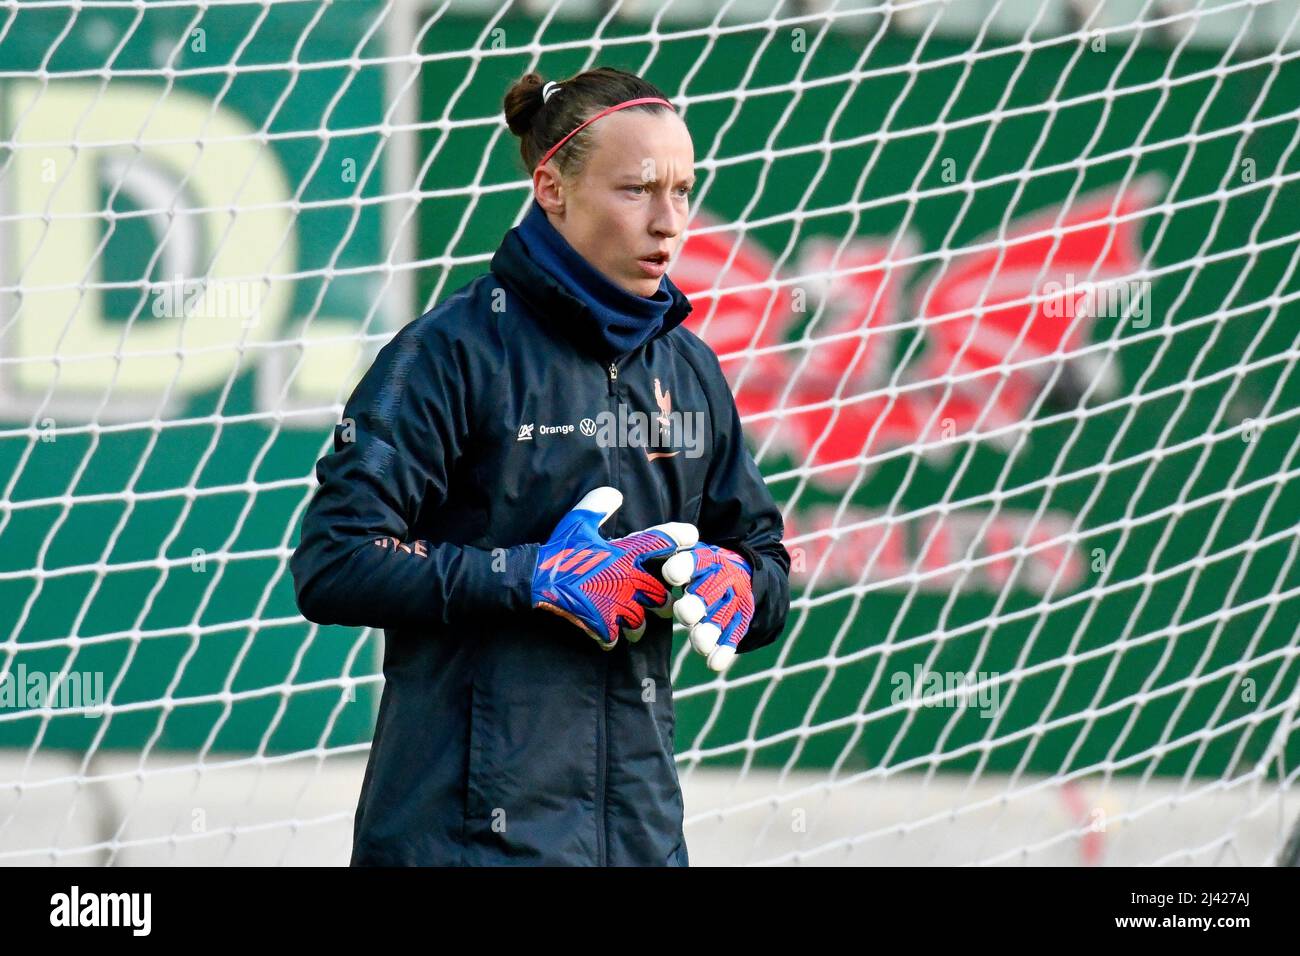 Llanelli, Wales. 8 April 2022. Goalkeeper Pauline Peyraud-Magnin of France Women during the pre-match warm-up before the FIFA Women's World Cup Qualifier Group I match between Wales Women and France Women at Parc y Scarlets in Llanelli, Wales, UK on 8 April 2022. Credit: Duncan Thomas/Majestic Media. Stock Photo